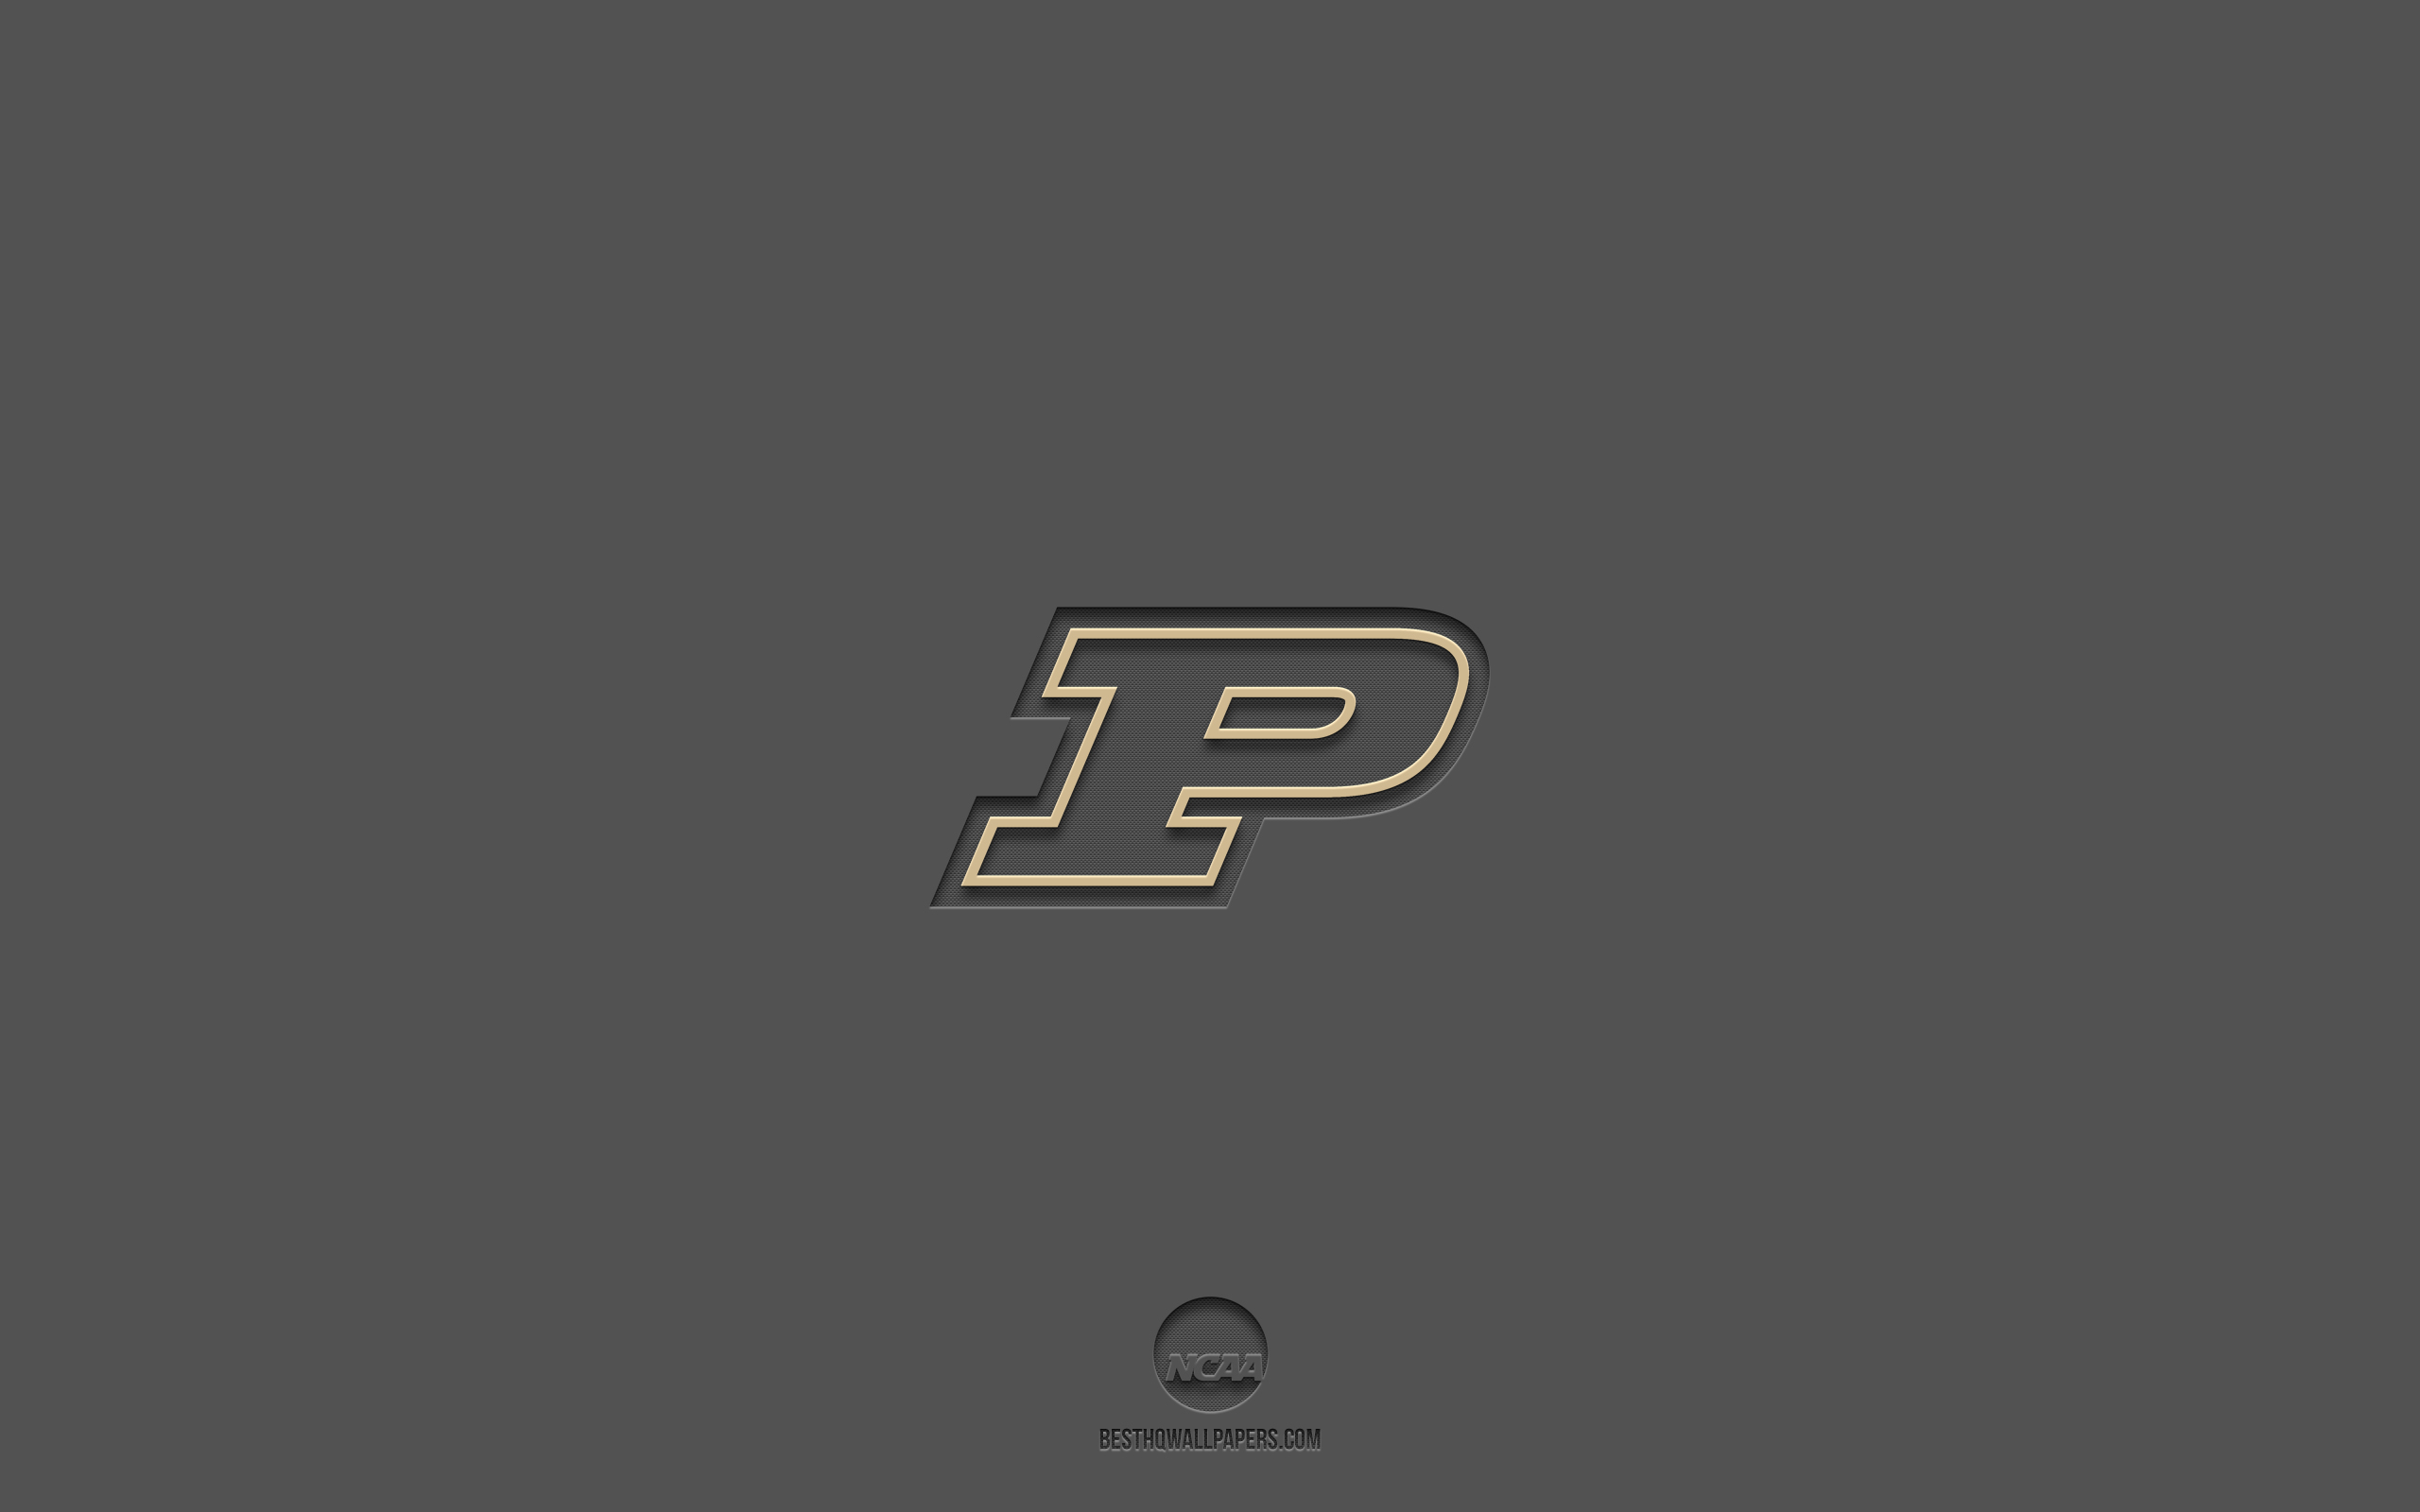 Get a Set of 12 Officially NCAA Licensed Purdue Boilermakers iPhone  Wallpapers sized precisely for any model of iPhone w  Purdue  boilermakers Purdue logo Purdue